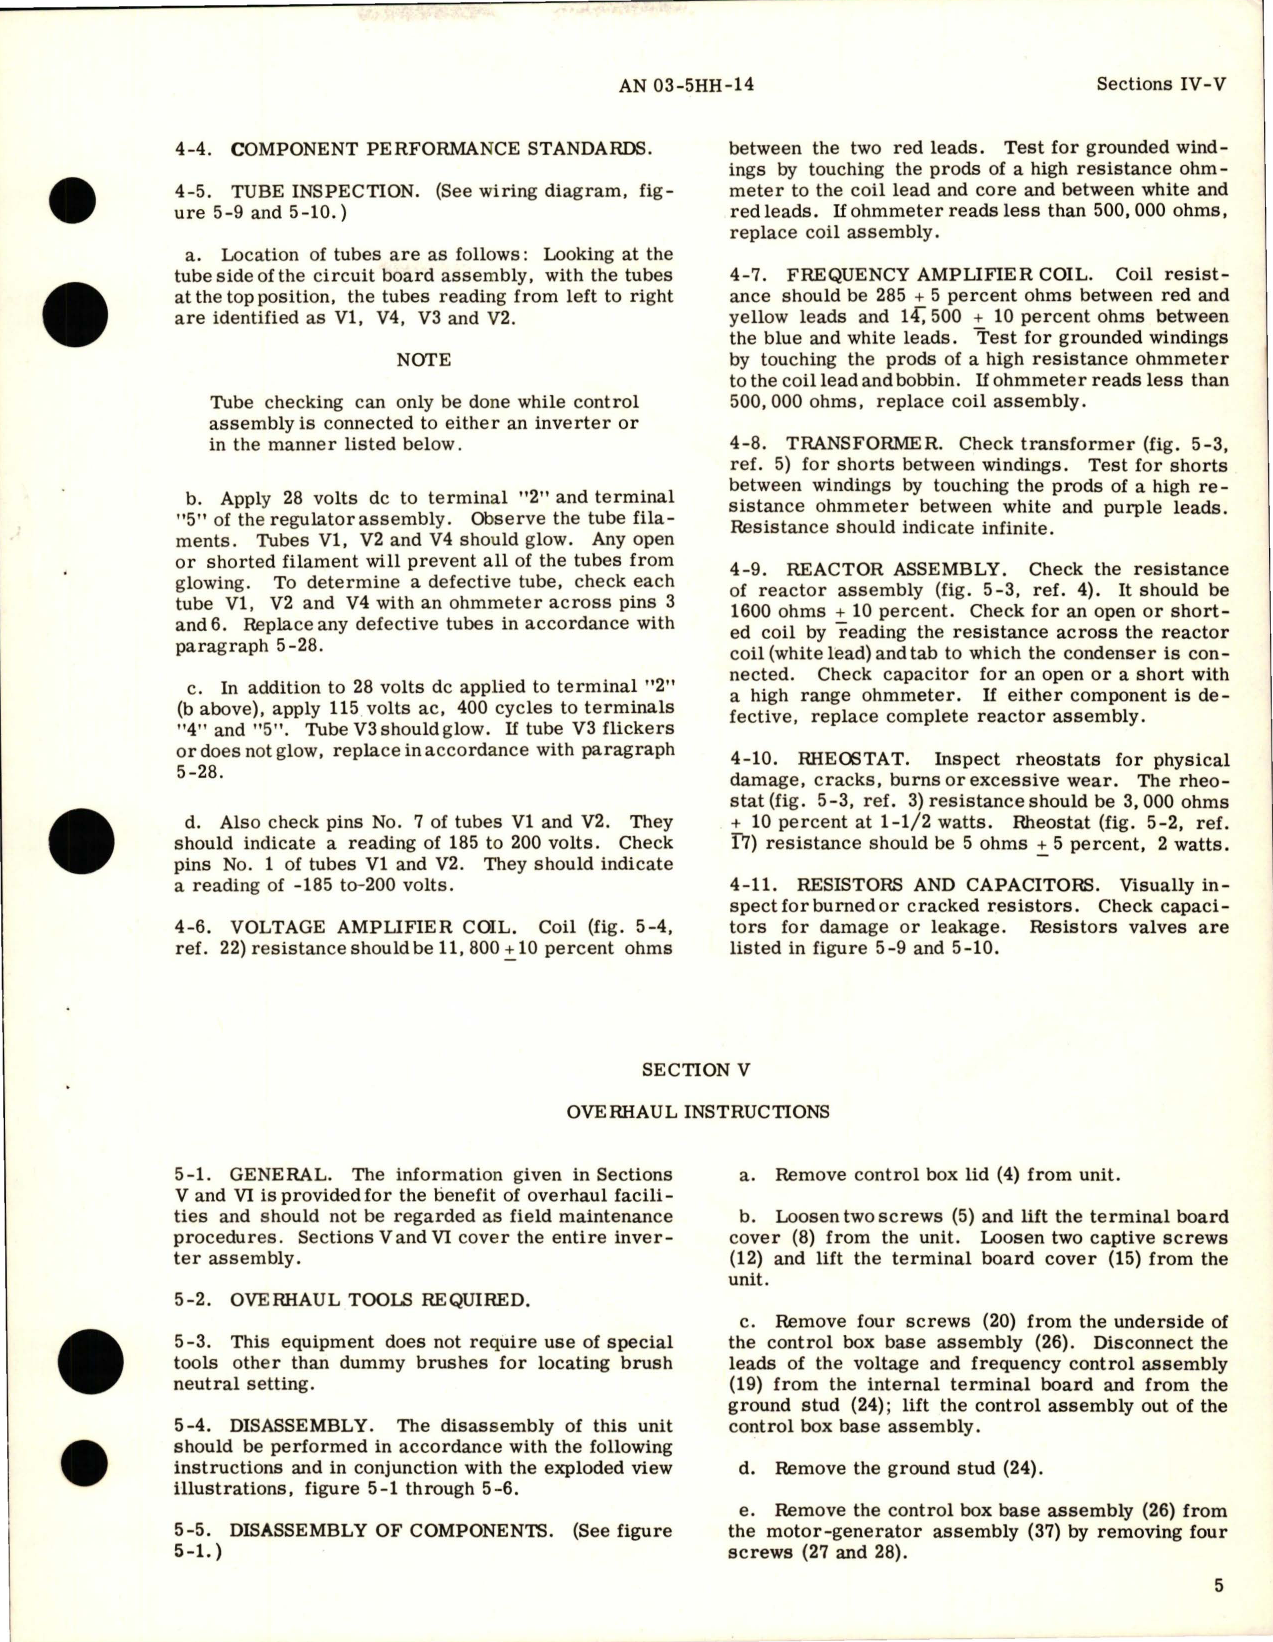 Sample page 9 from AirCorps Library document: Overhaul Instructions for Inverter - Part SE-9-1, and Motor Generator - Part SE-9-1-1A 